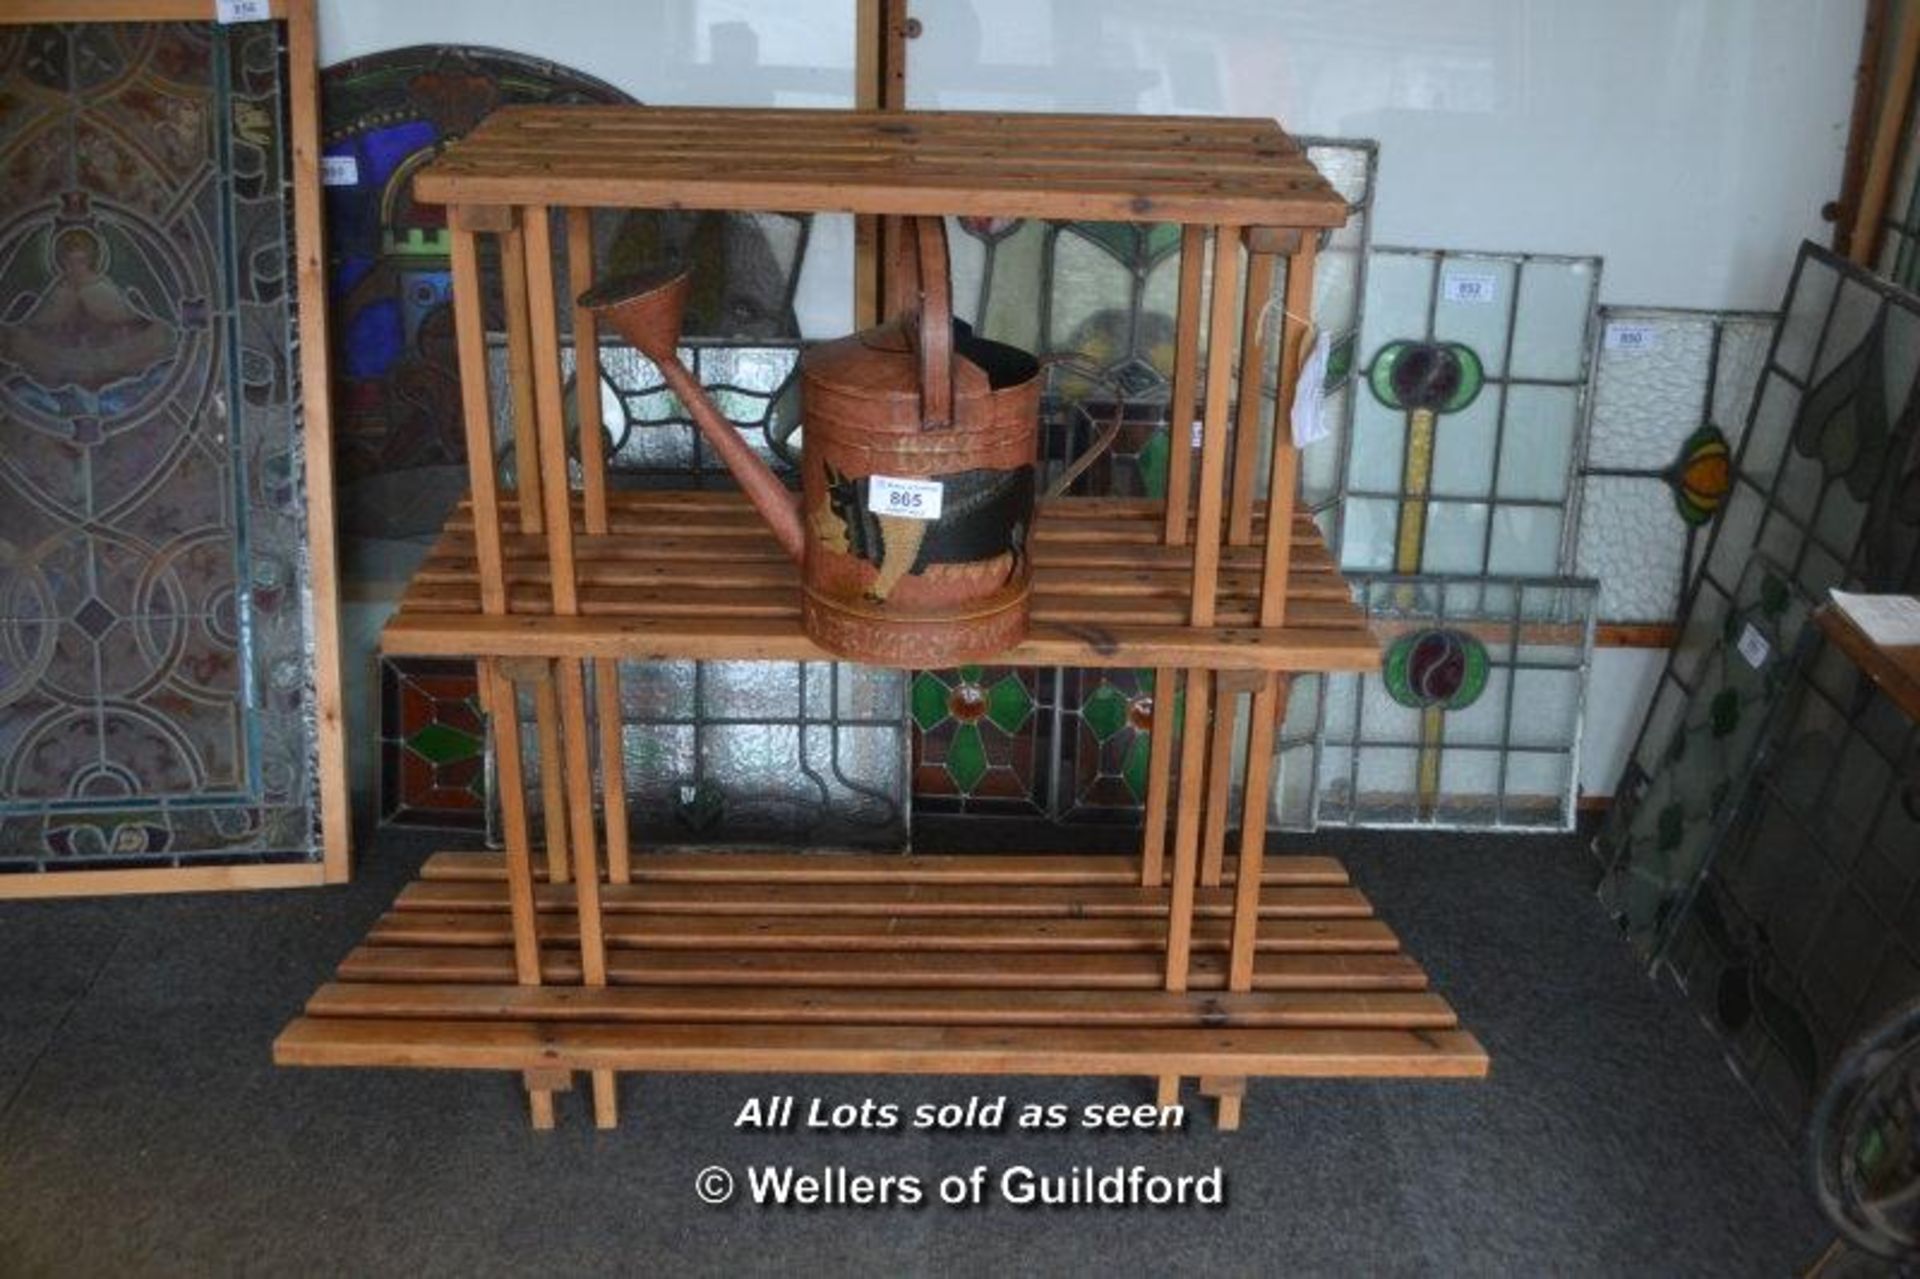 *PLANT STAND FOR A BAY WINDOW (AND WATERING CAN) 1070MM - 1220 MM WIDE X 410 MM DEEP X 1010 MM HIGH